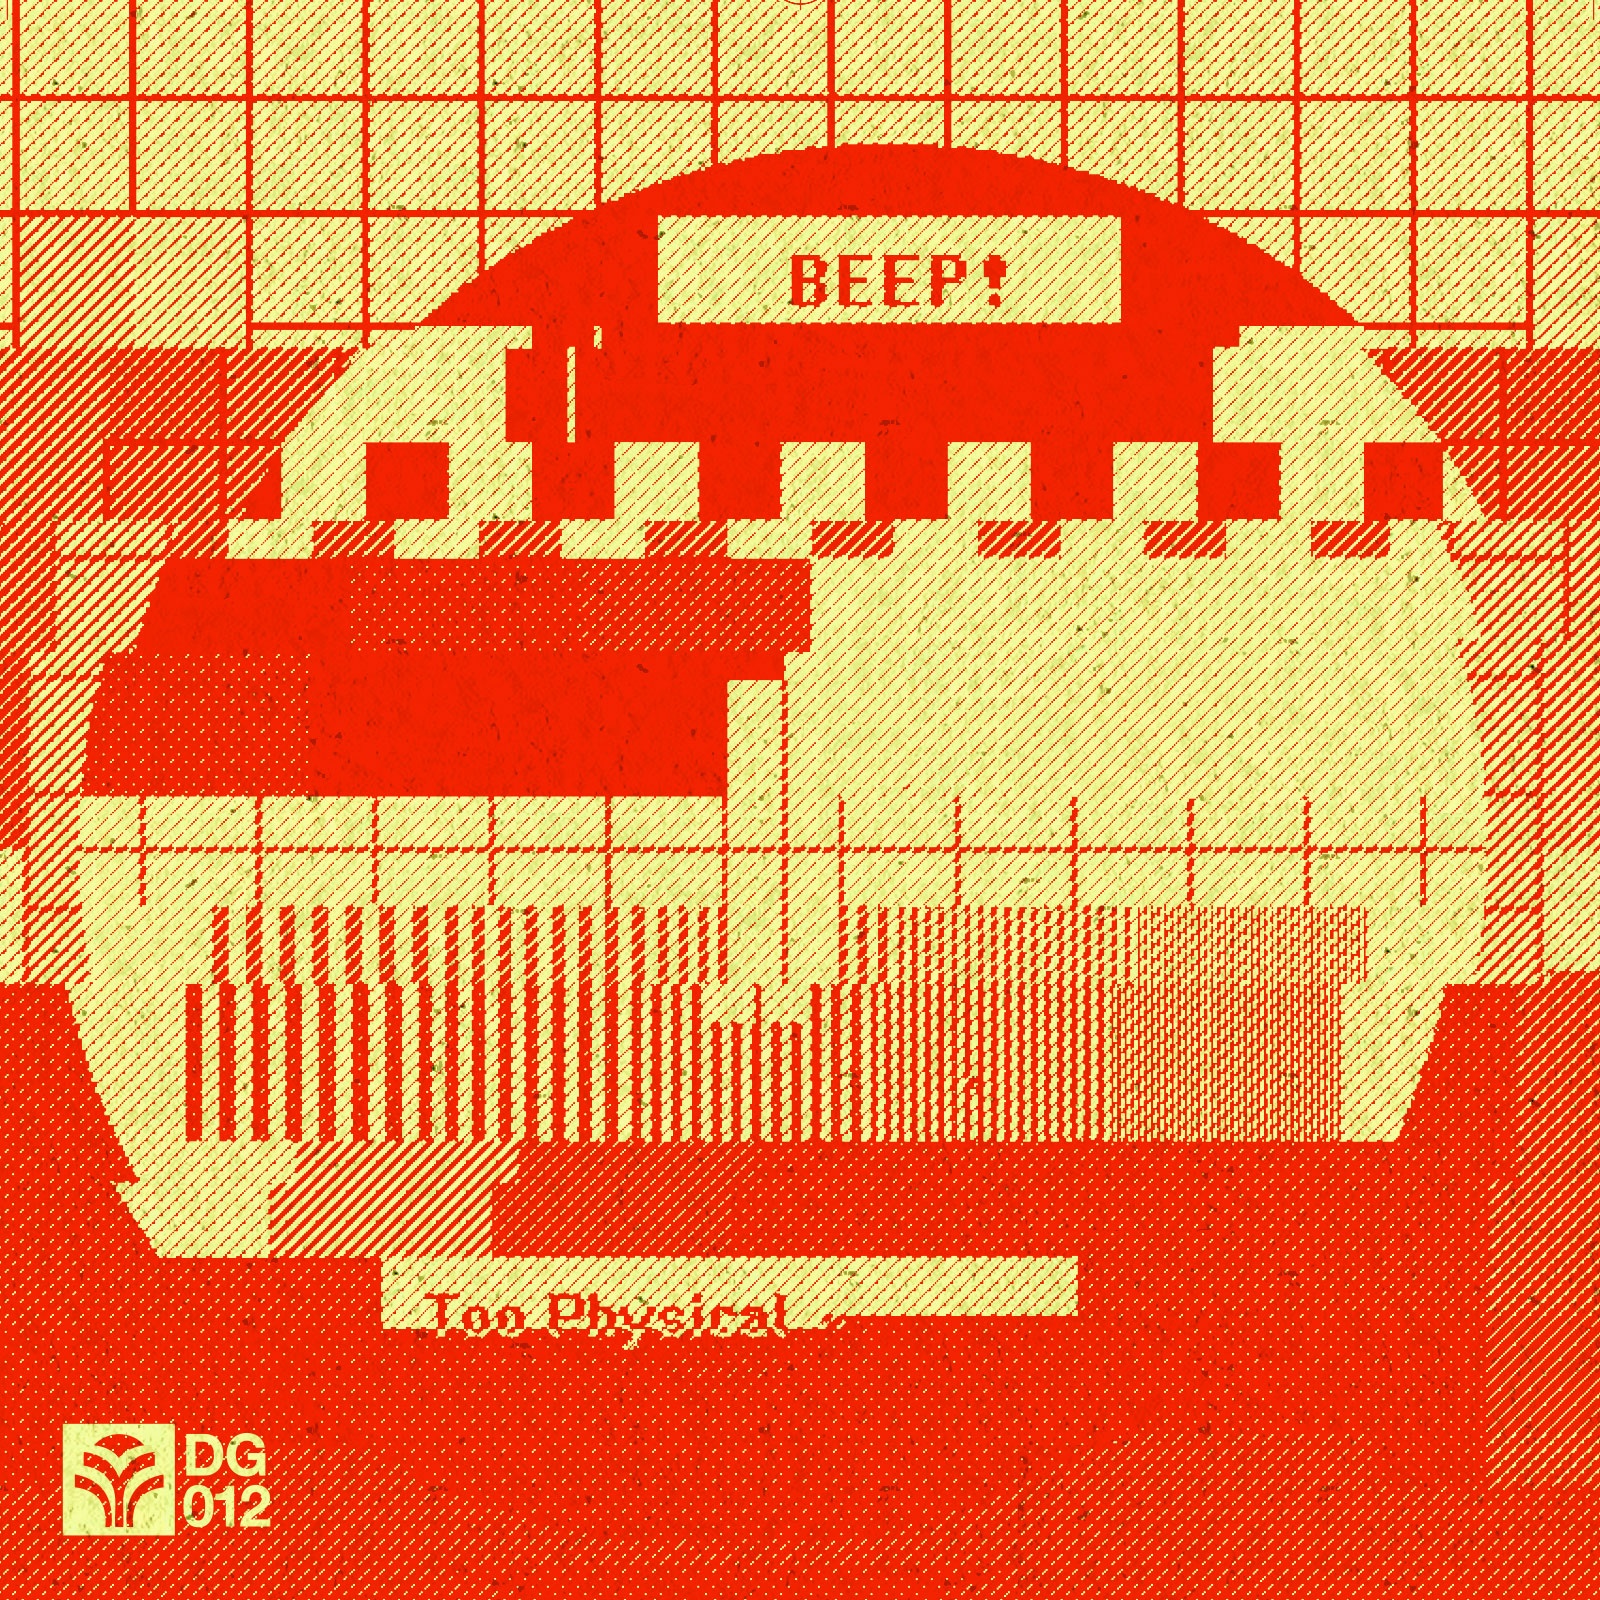 Classic Beep Melody